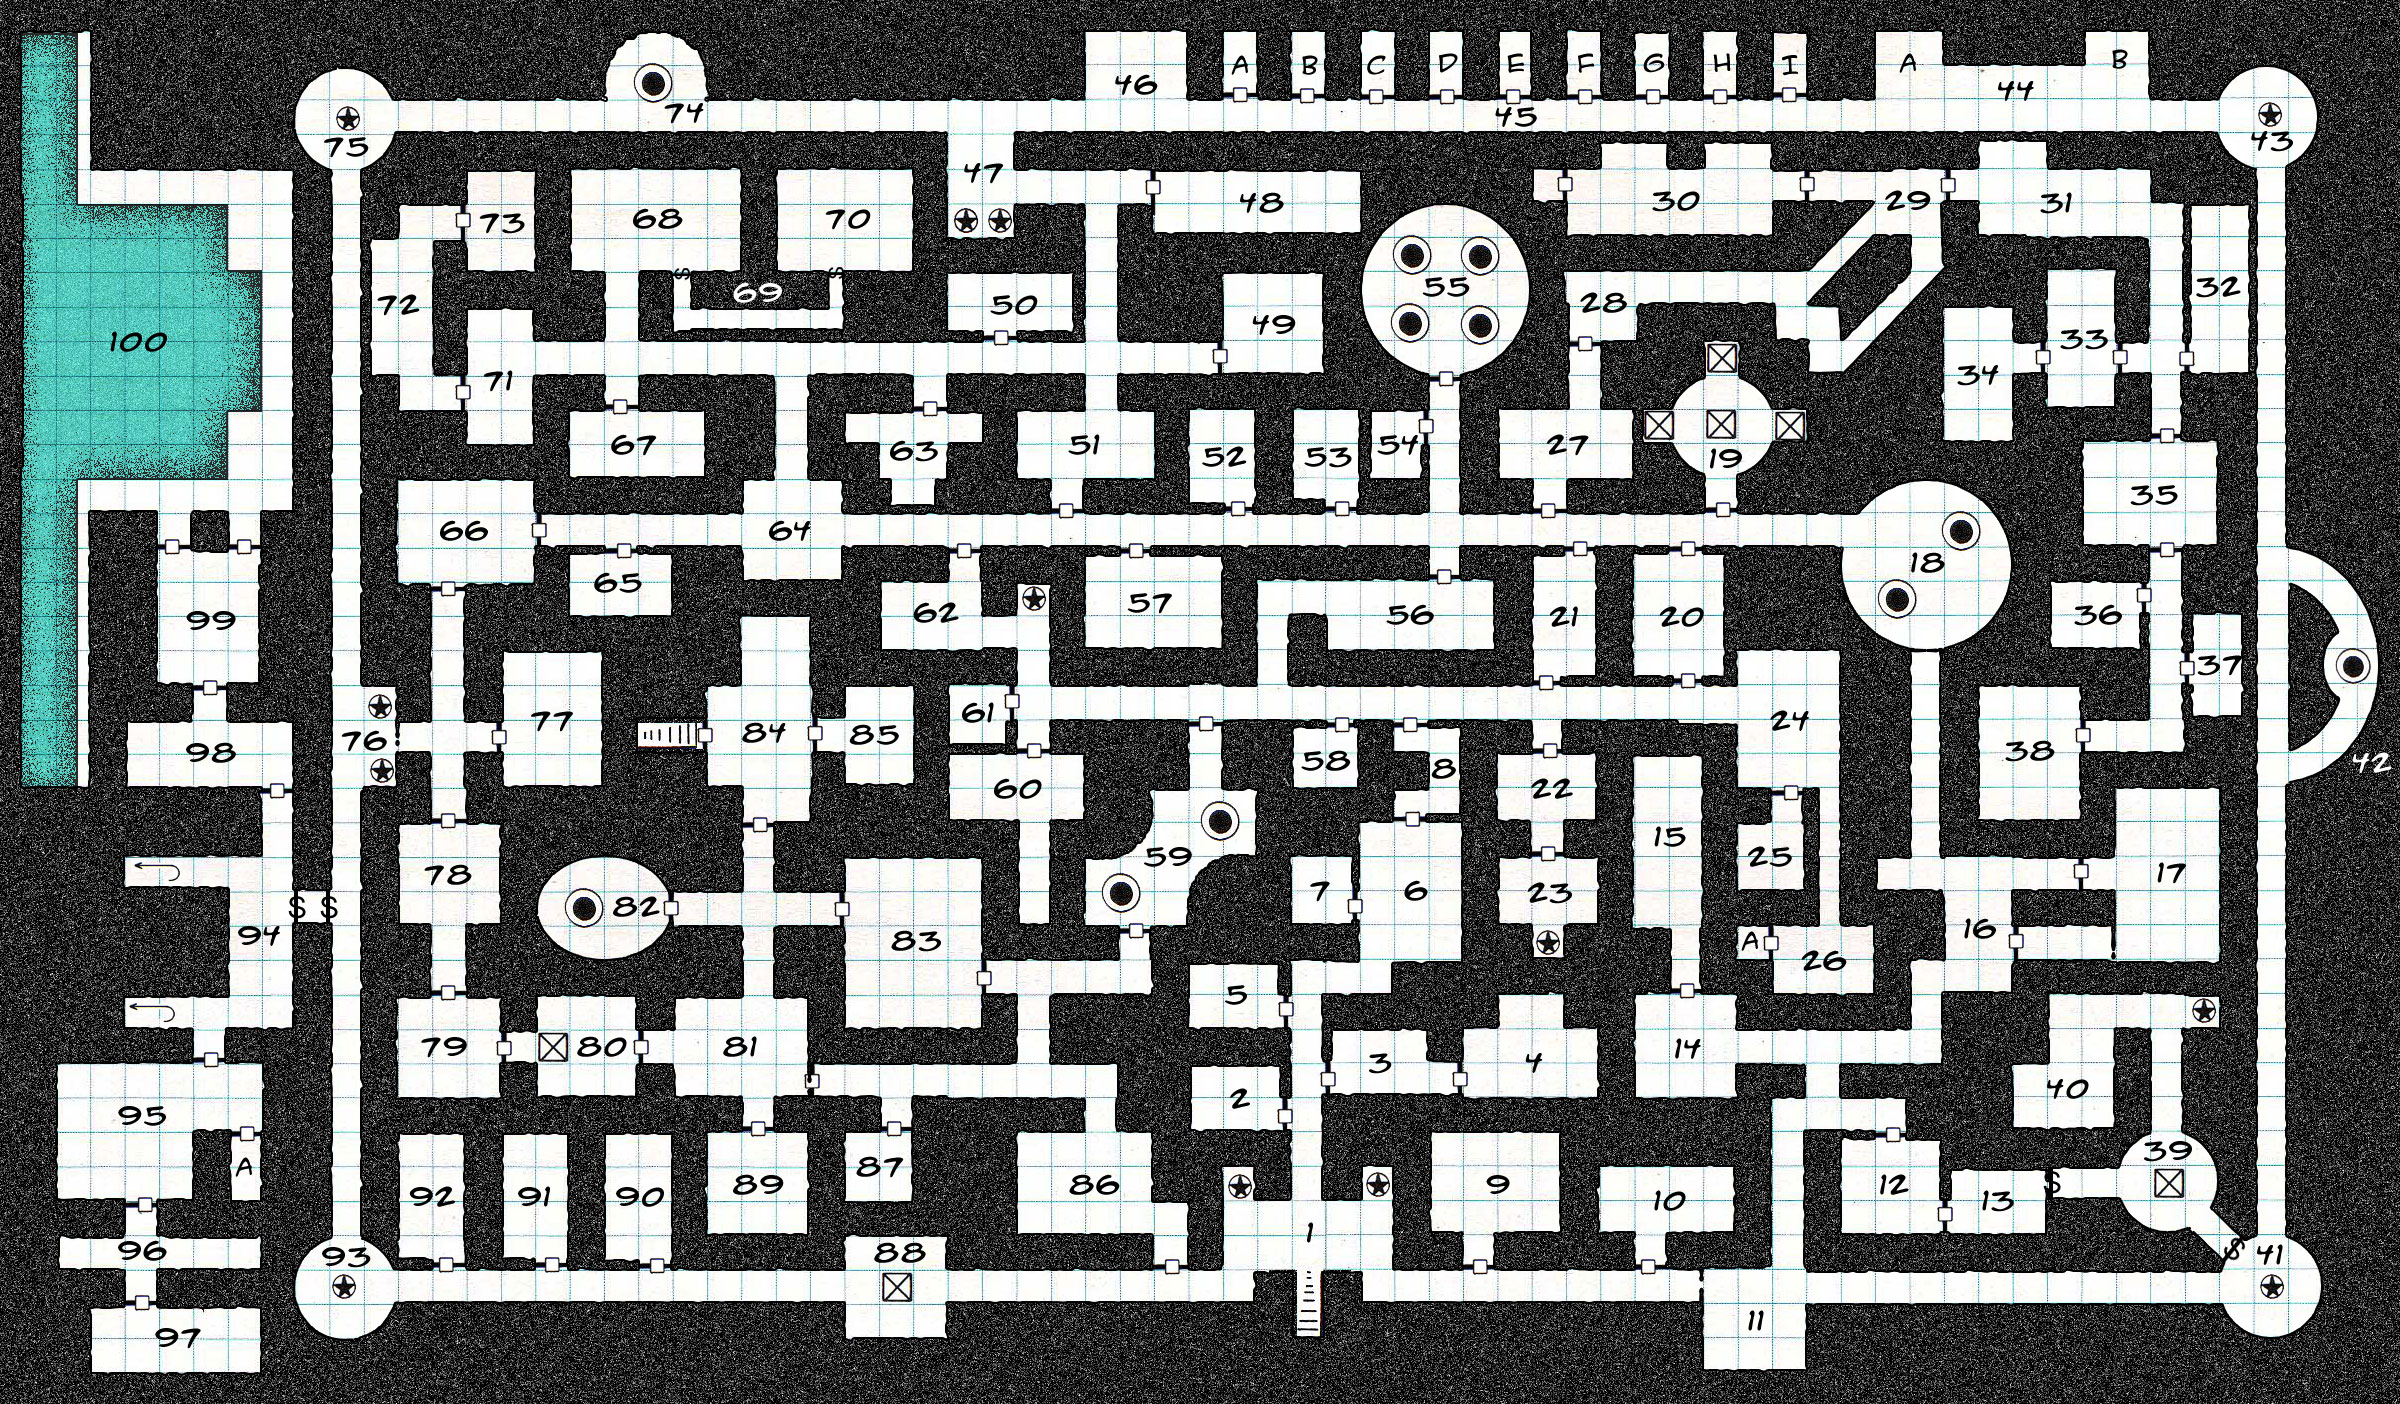 Source: http://paratime.ca/cartography/bw_dungeons.html